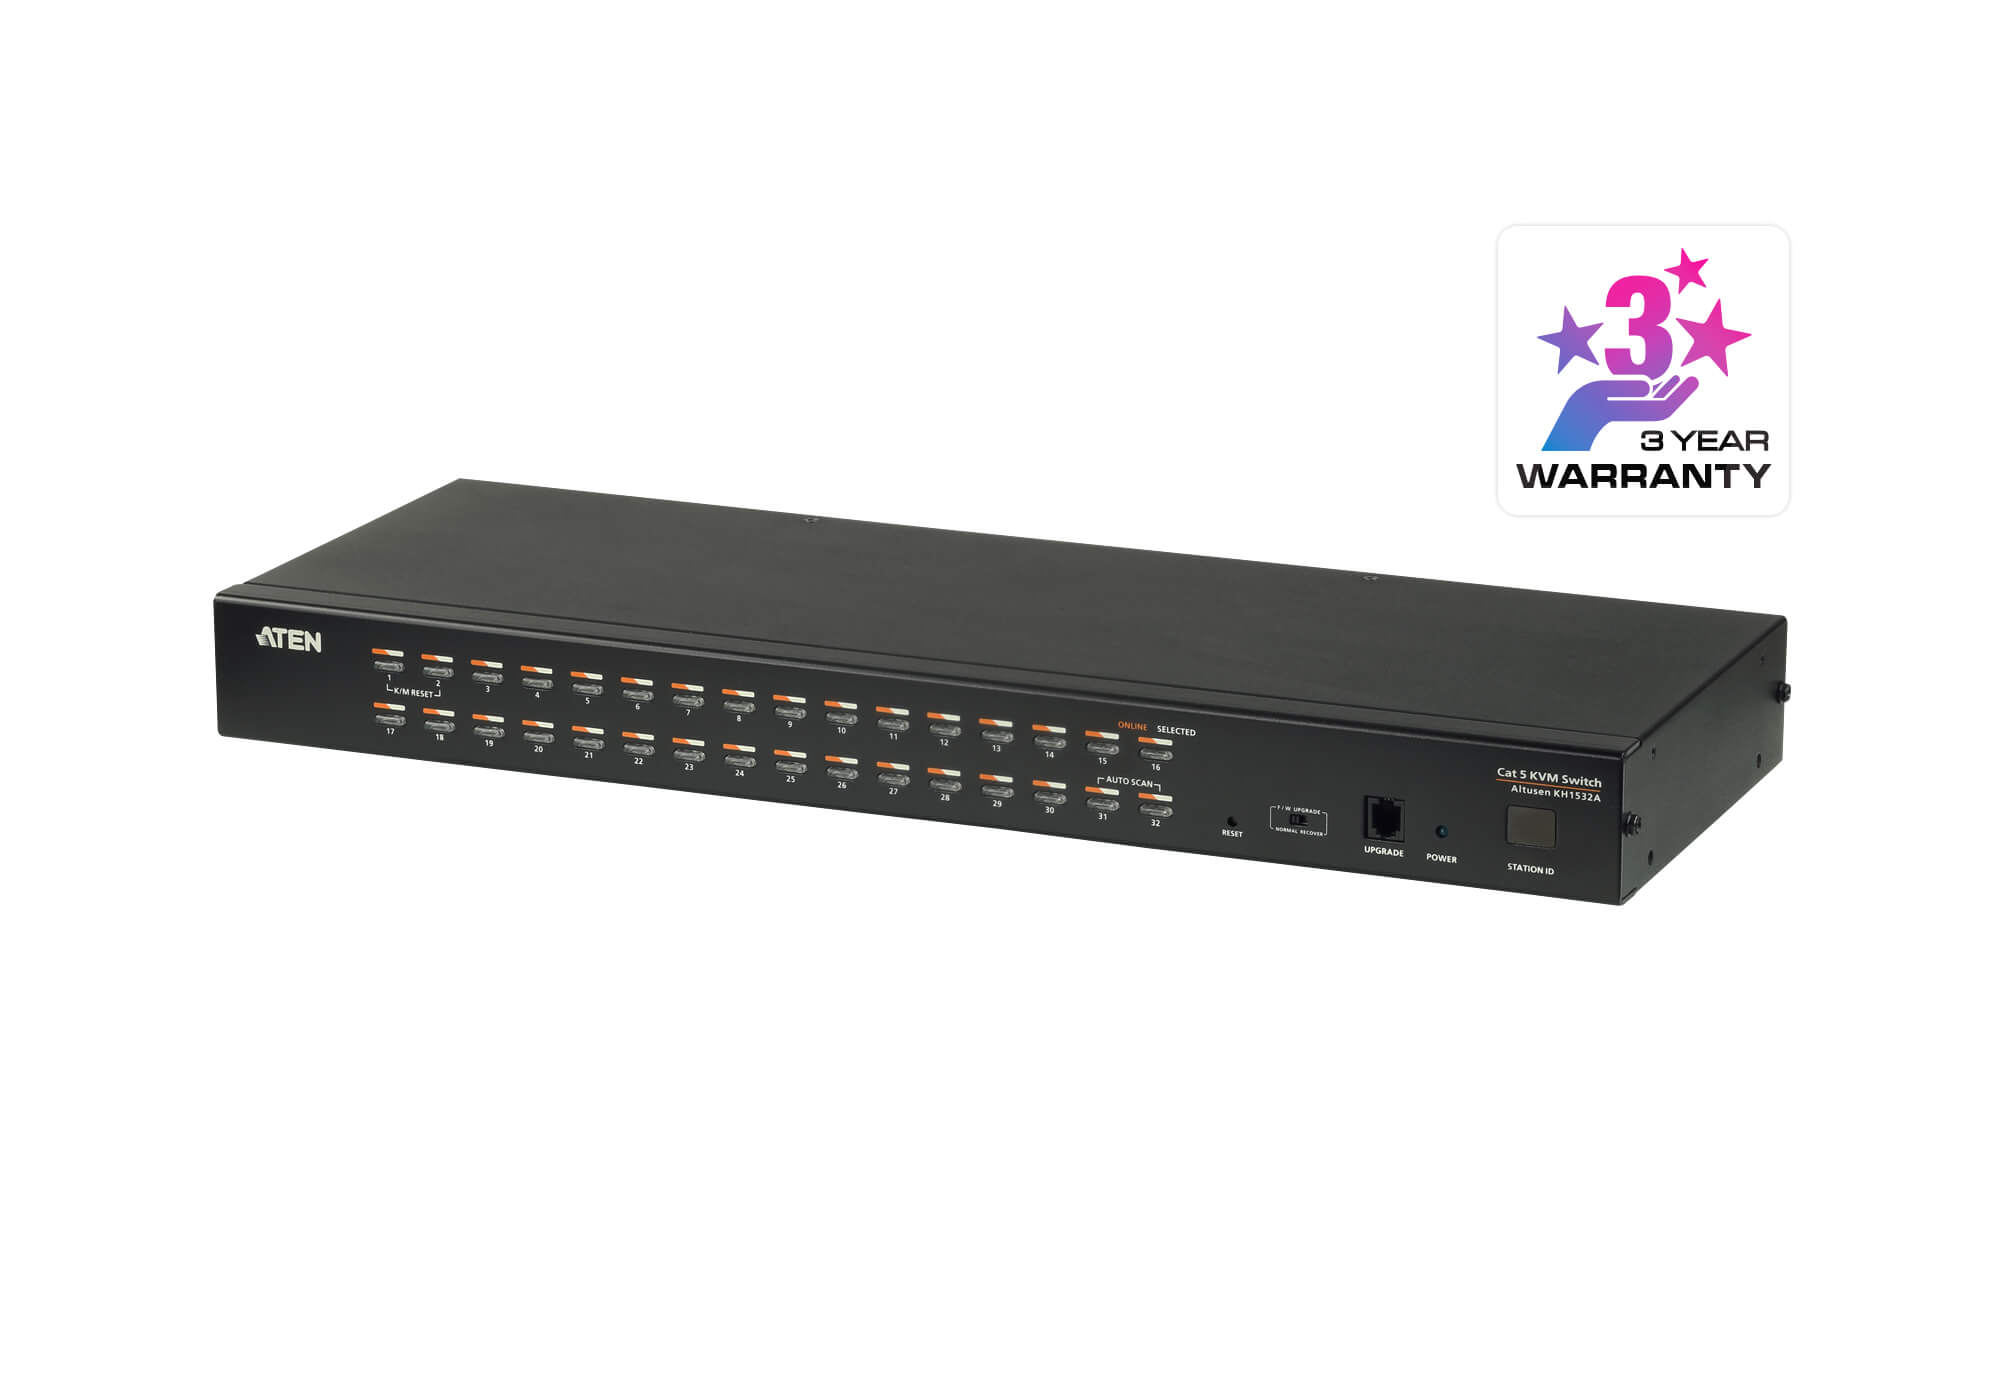 KVM Switches/Aten: Aten, Rackmount, KVM, Switch, 1, Console, 32, Port, Multi-Interface, Cat, 5, KVM, Cables, NOT, Included, Daisy, Chainable, for, up, to, 10, 